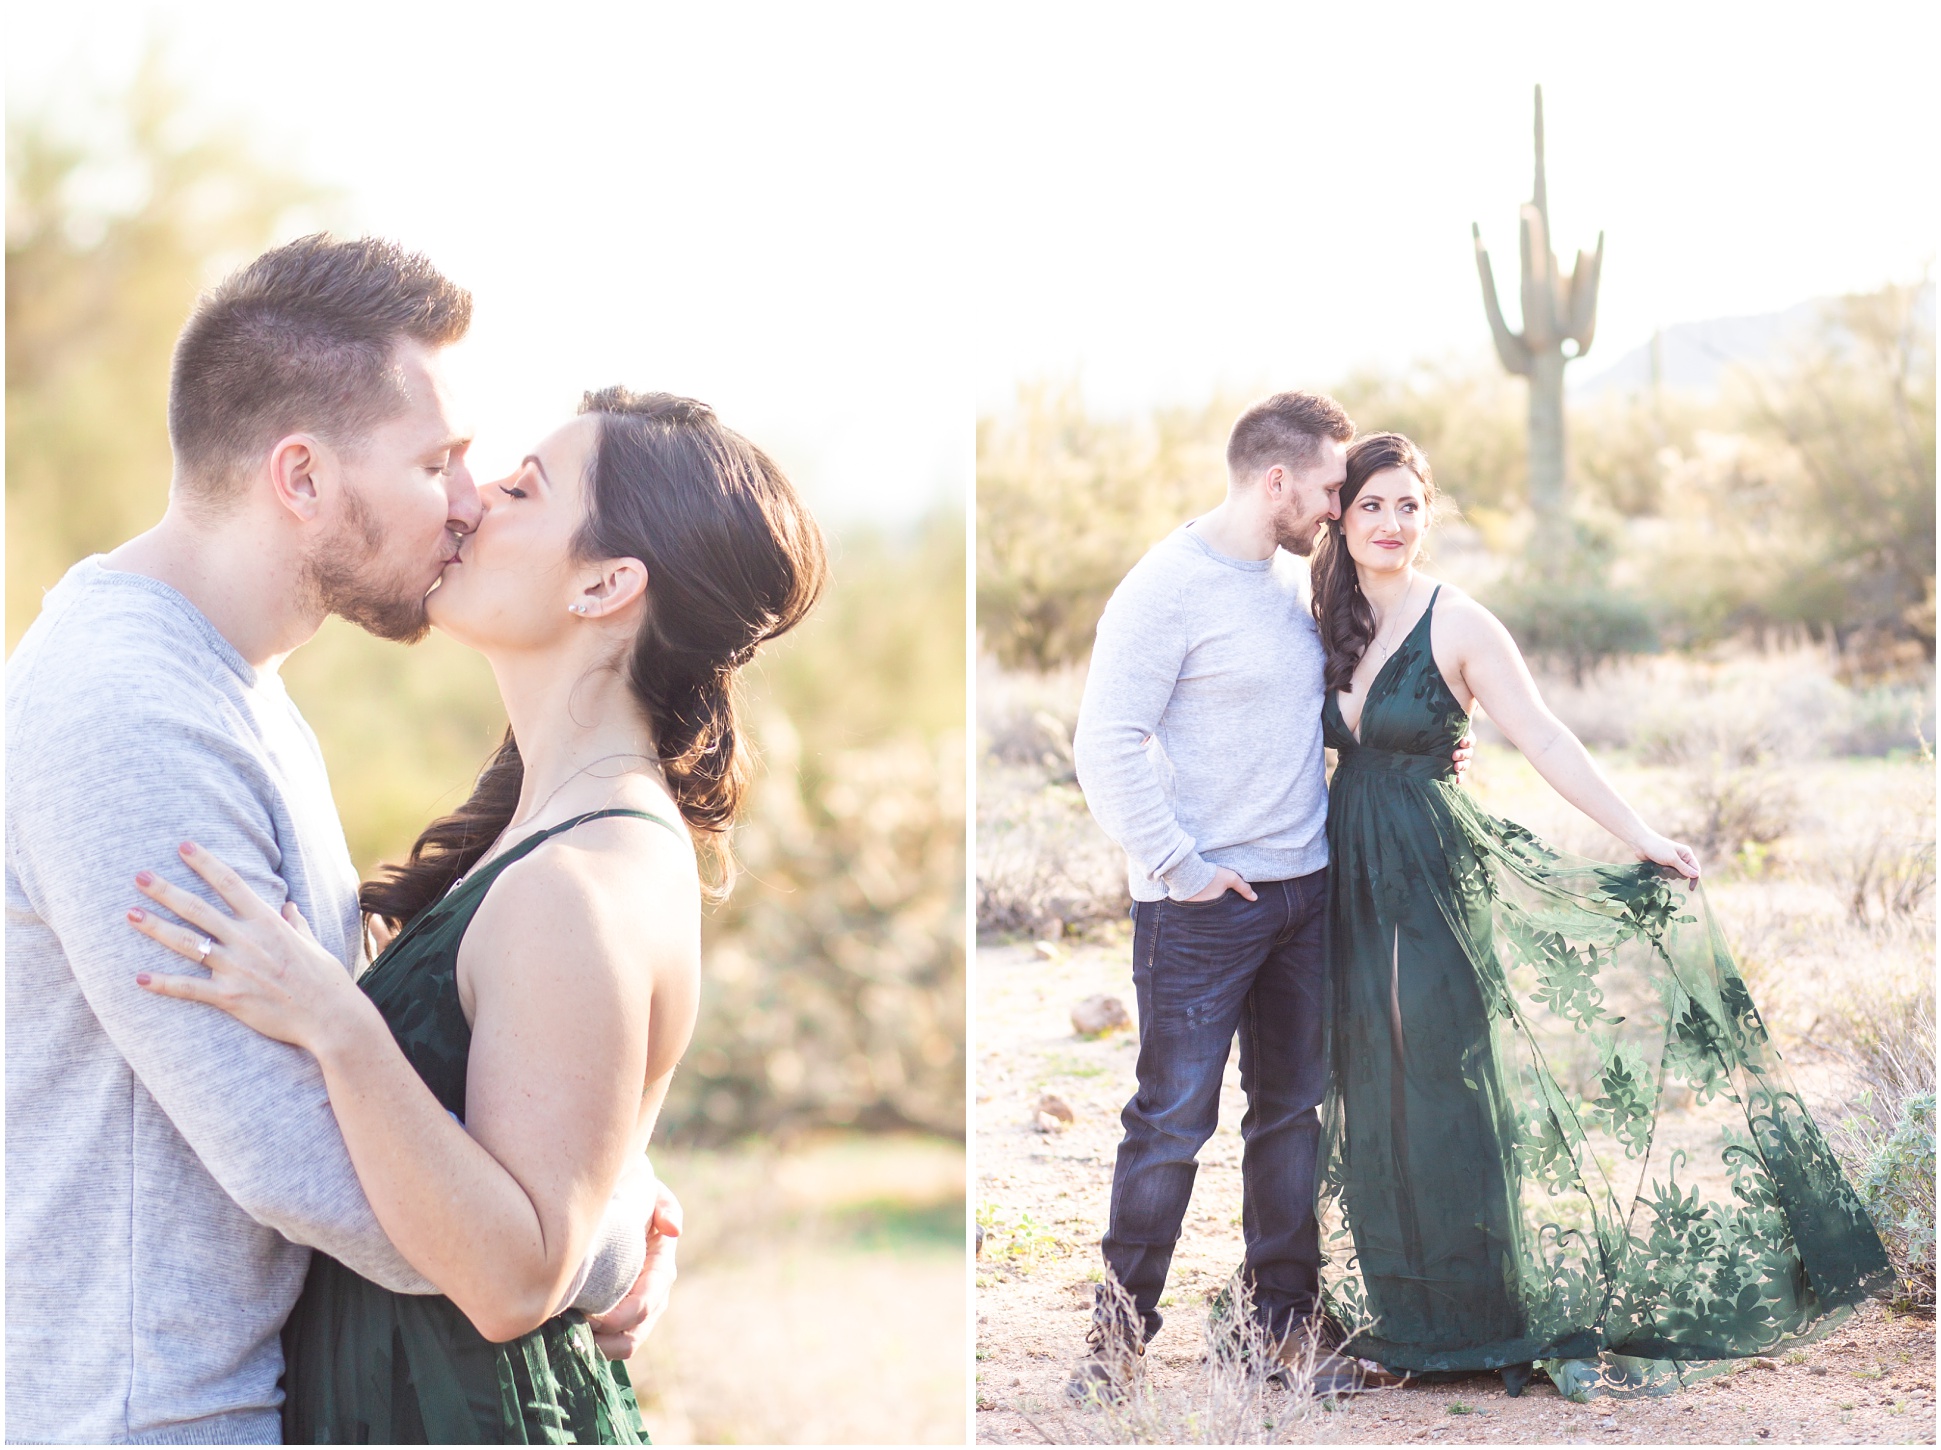 Left Image: Jake and Kaila Kissing, Right ImageL Jake nuzzling Kaila while she plays with her dress